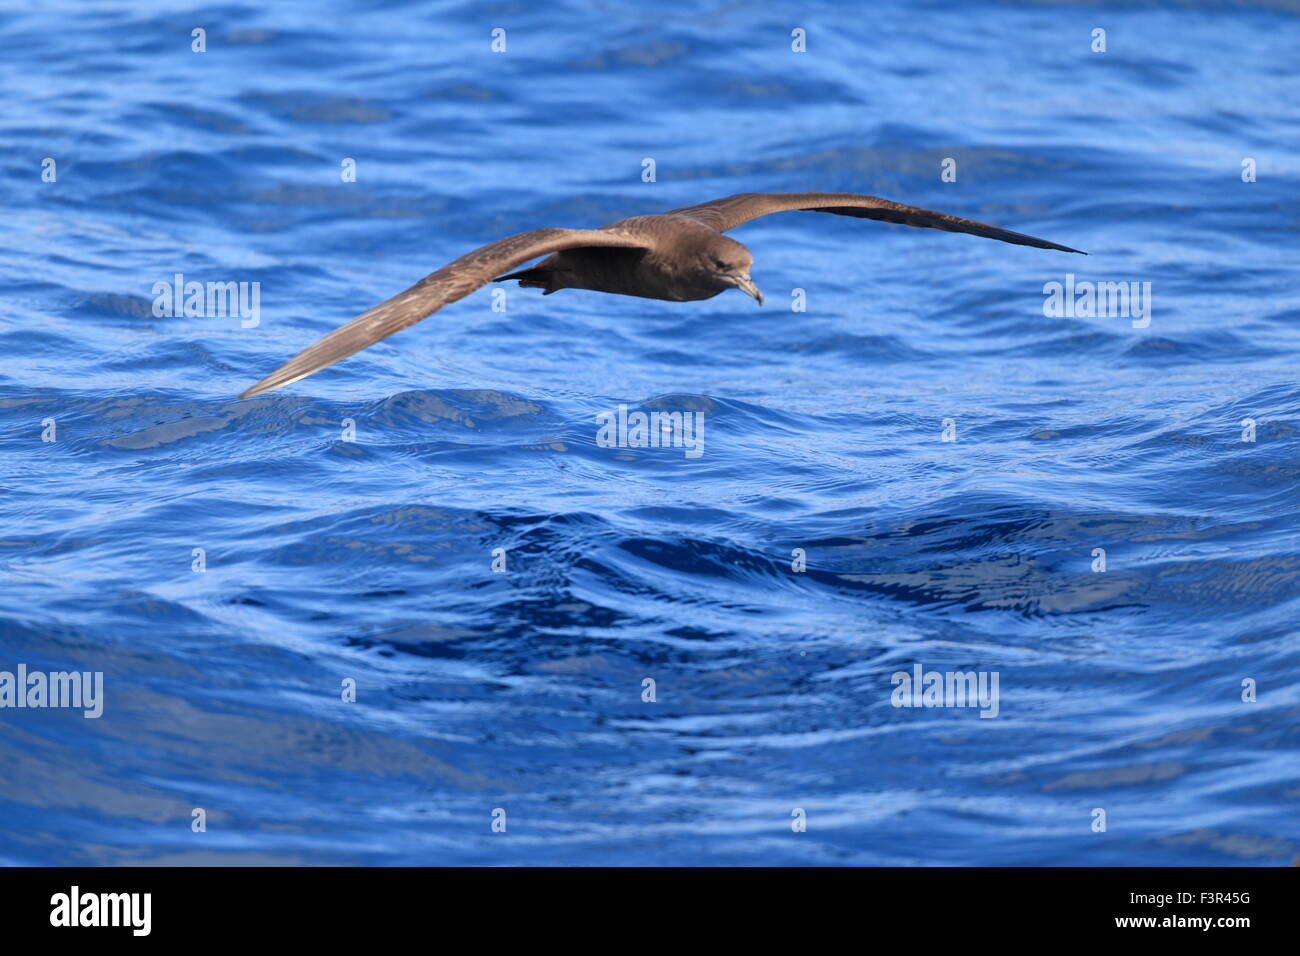 Wedge-tailed Shearwater (Procellaria pacifica) in Australia Stock Photo